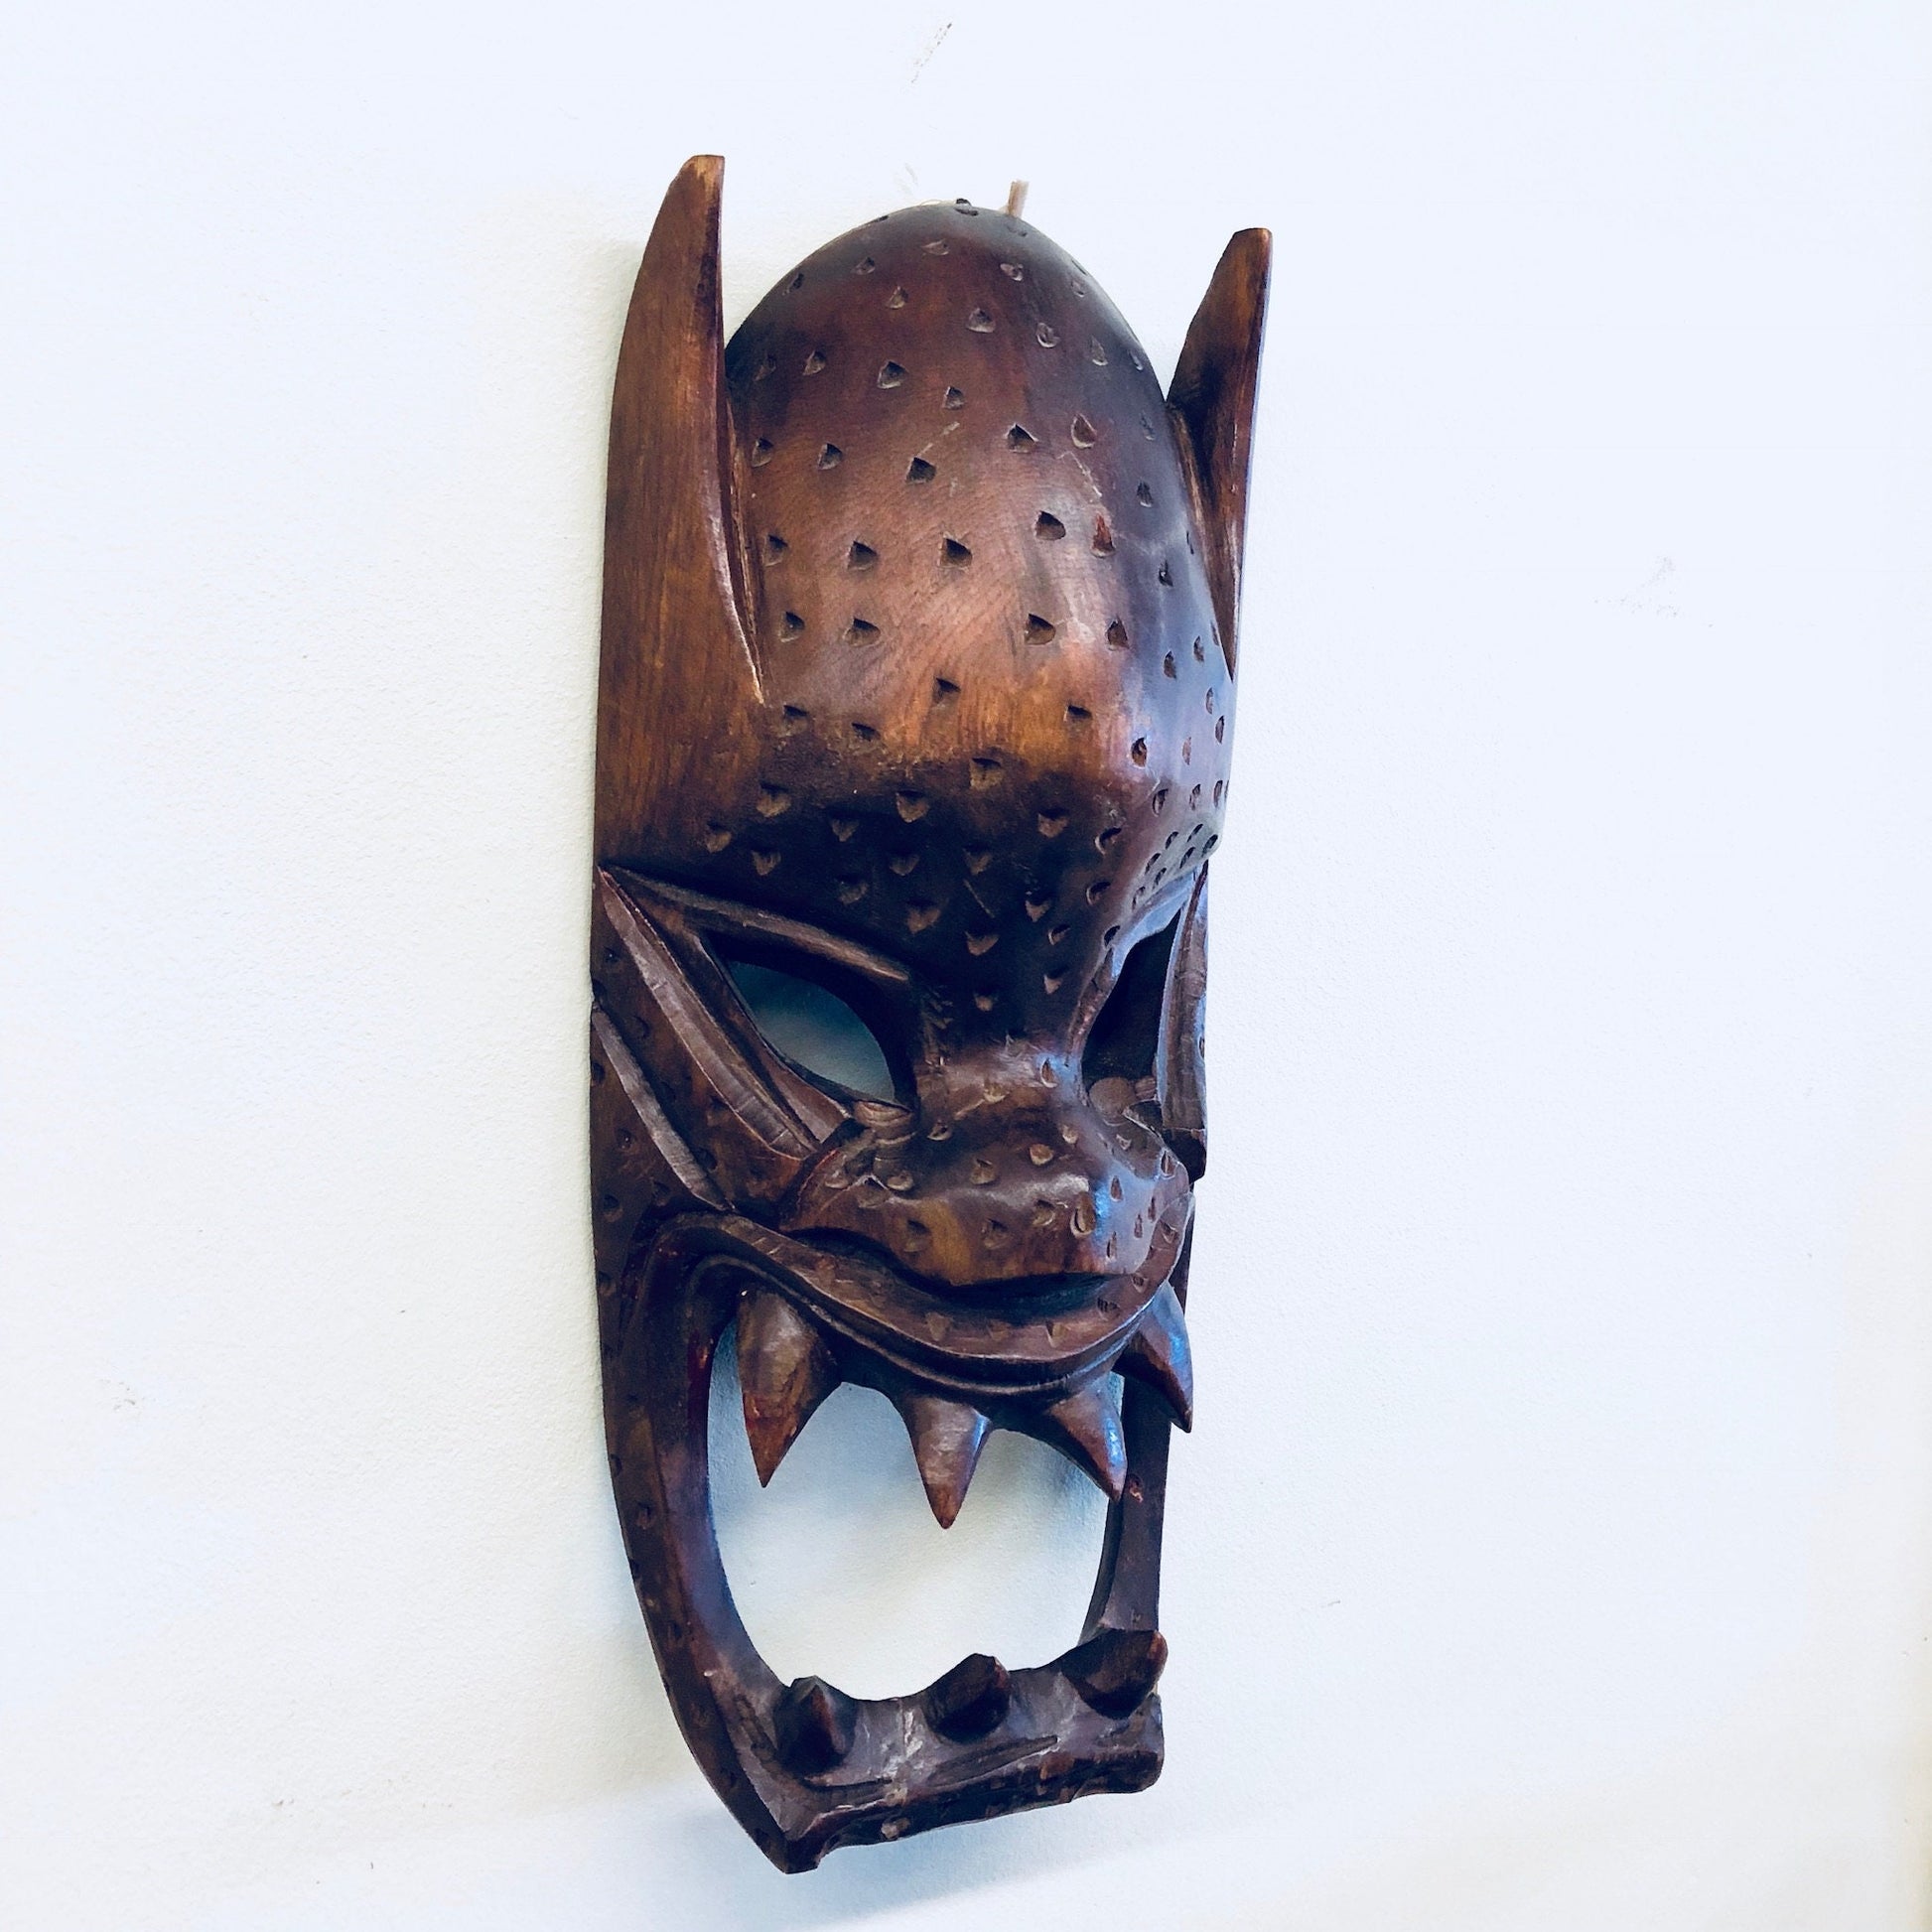 Vintage hand carved wooden mask with intricate dot patterns and jagged teeth, displayed as a wall hanging for primitive home decor.